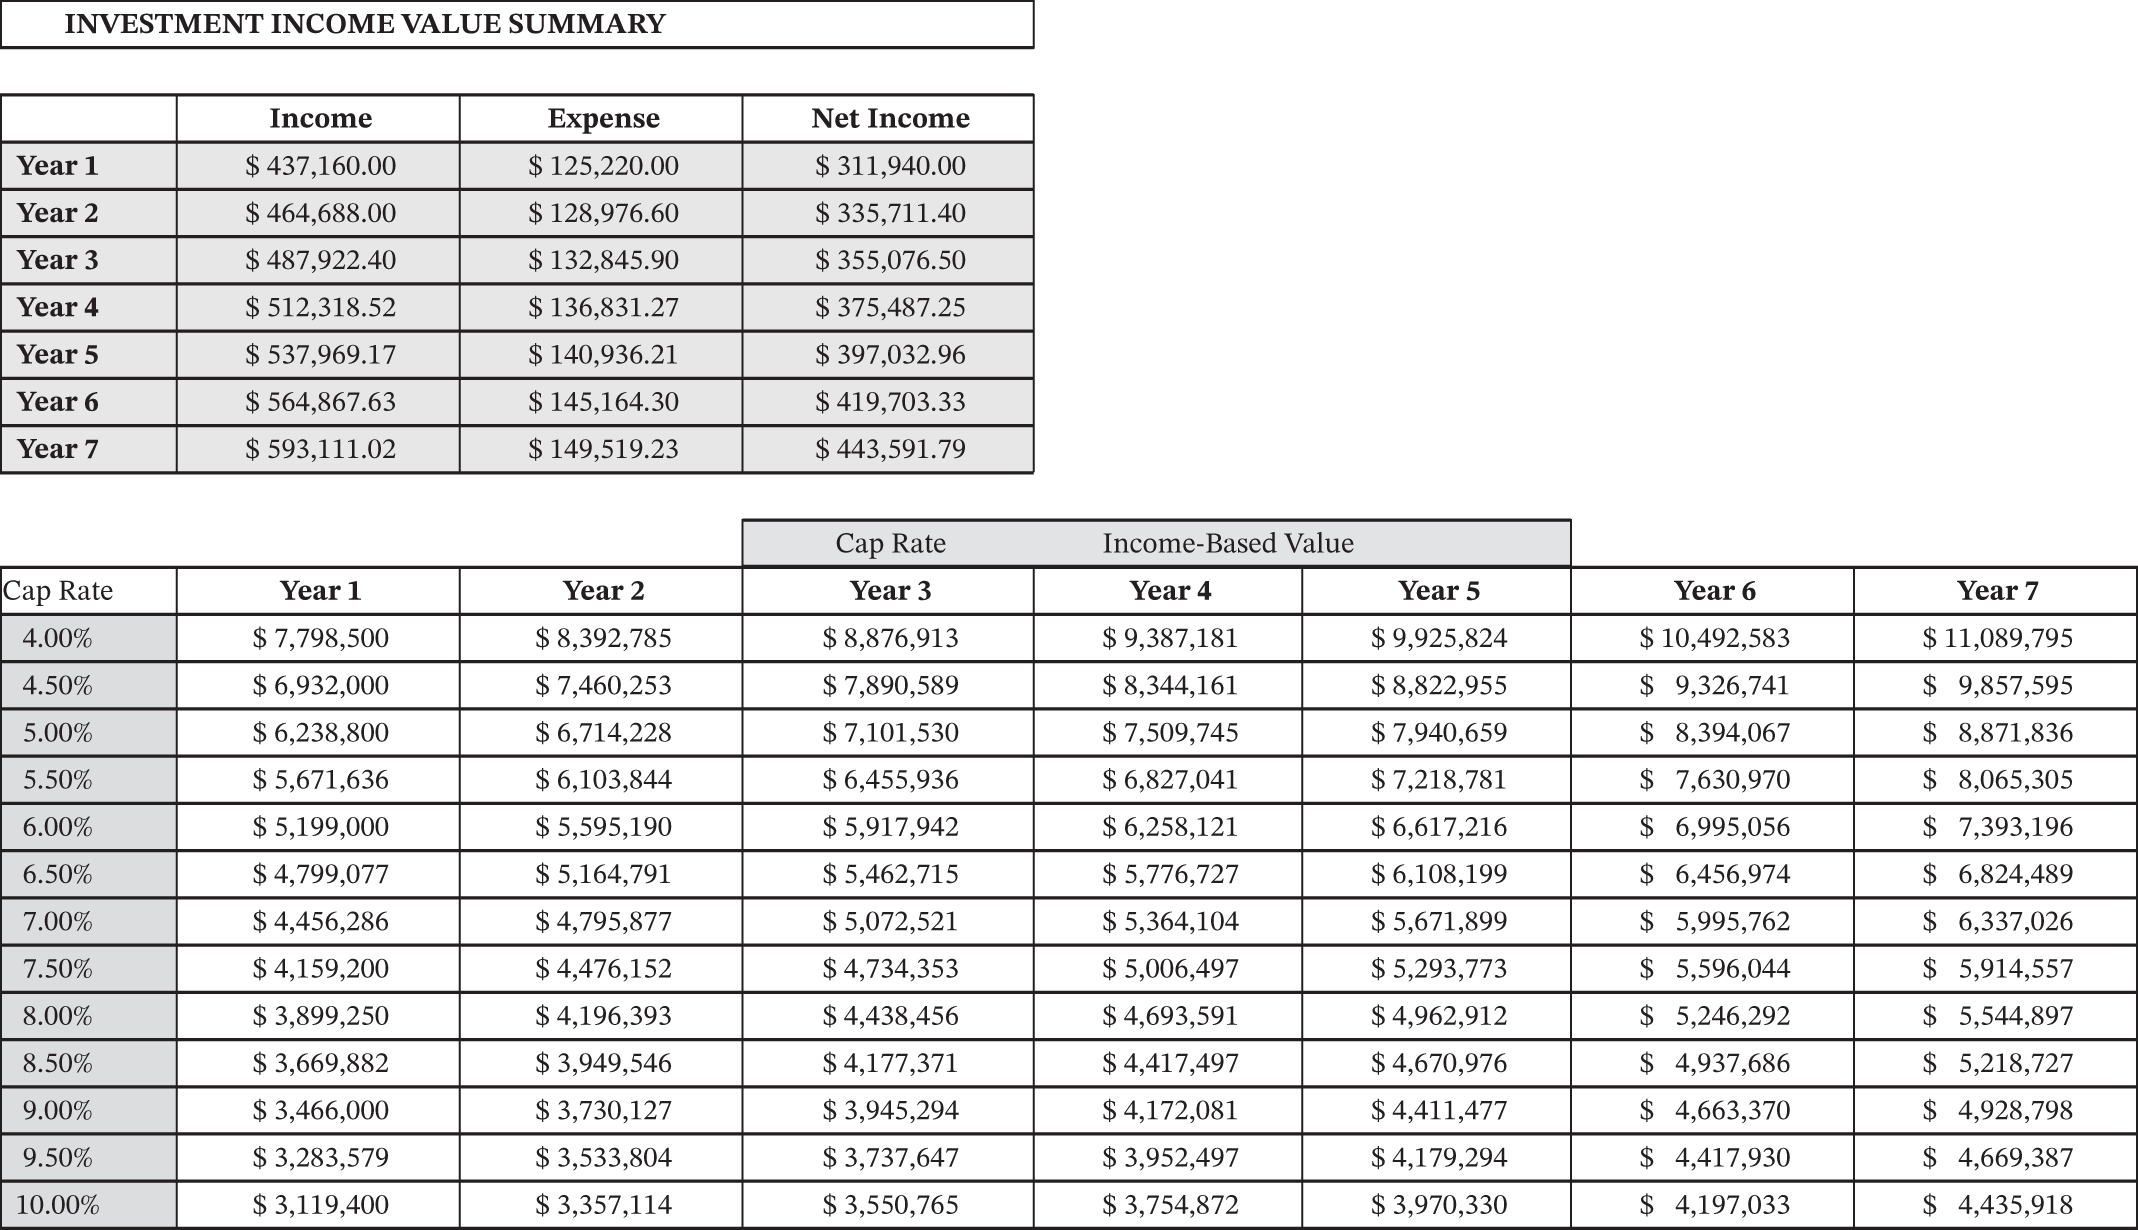 Tabular representation of the investment income value summary.